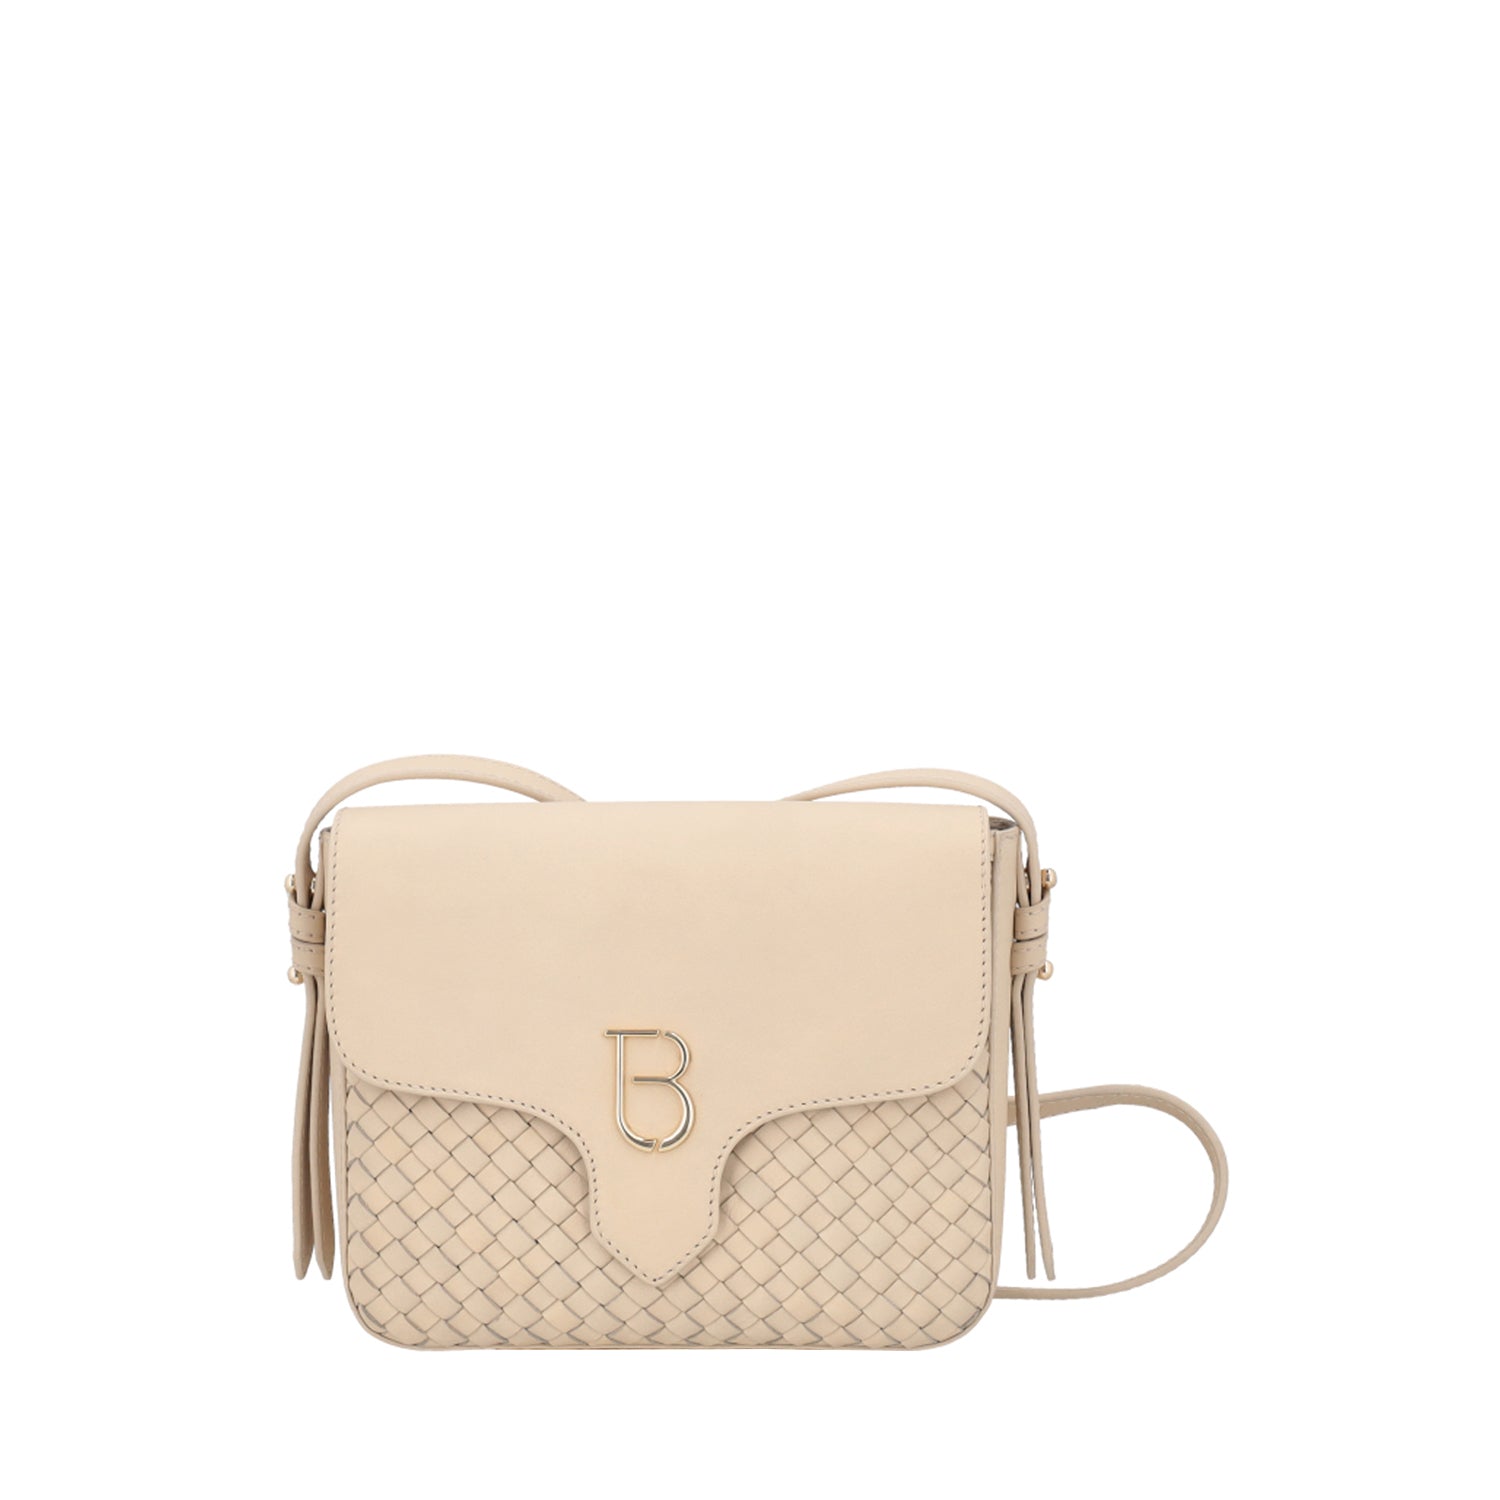 NATURAL FRESIA CROSSBODY BAG IN WOVEN LEATHER